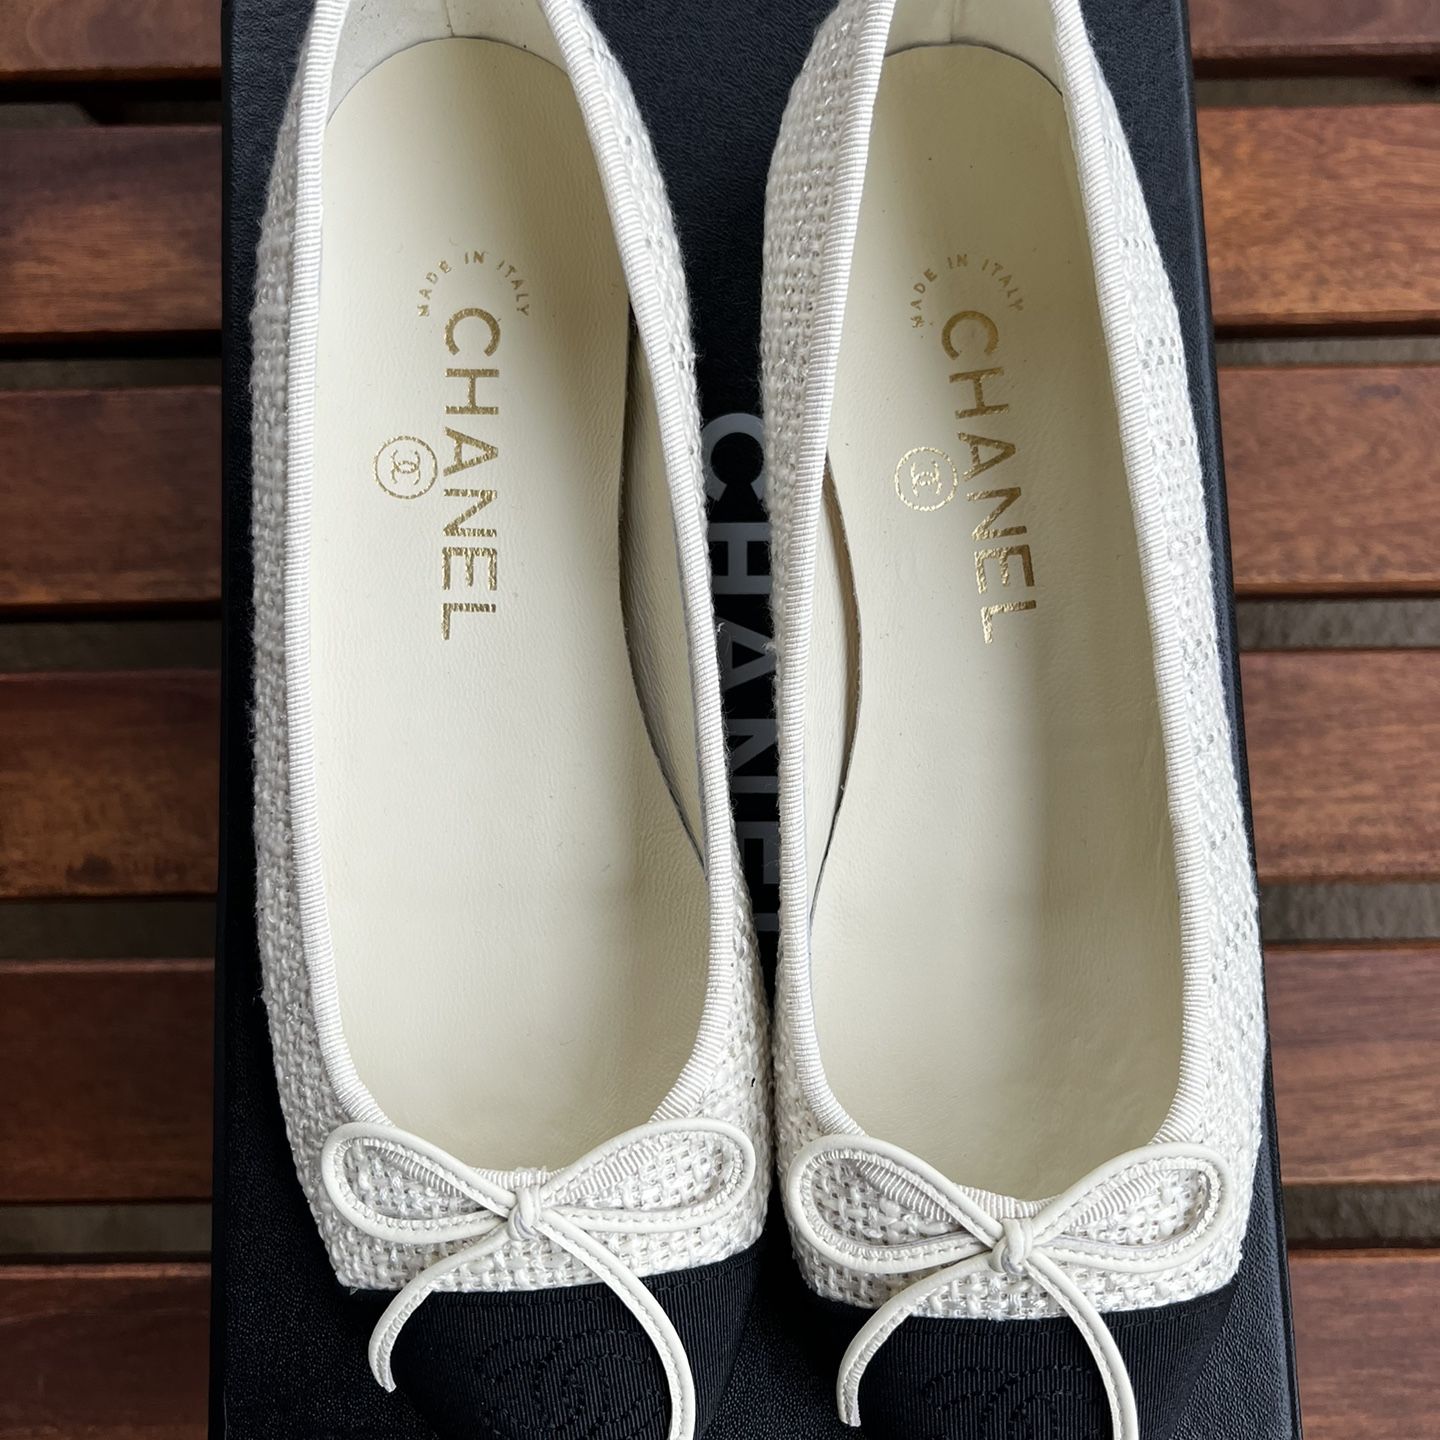 Women's Flats - Size 9.5 for Sale in Montclair, CA - OfferUp